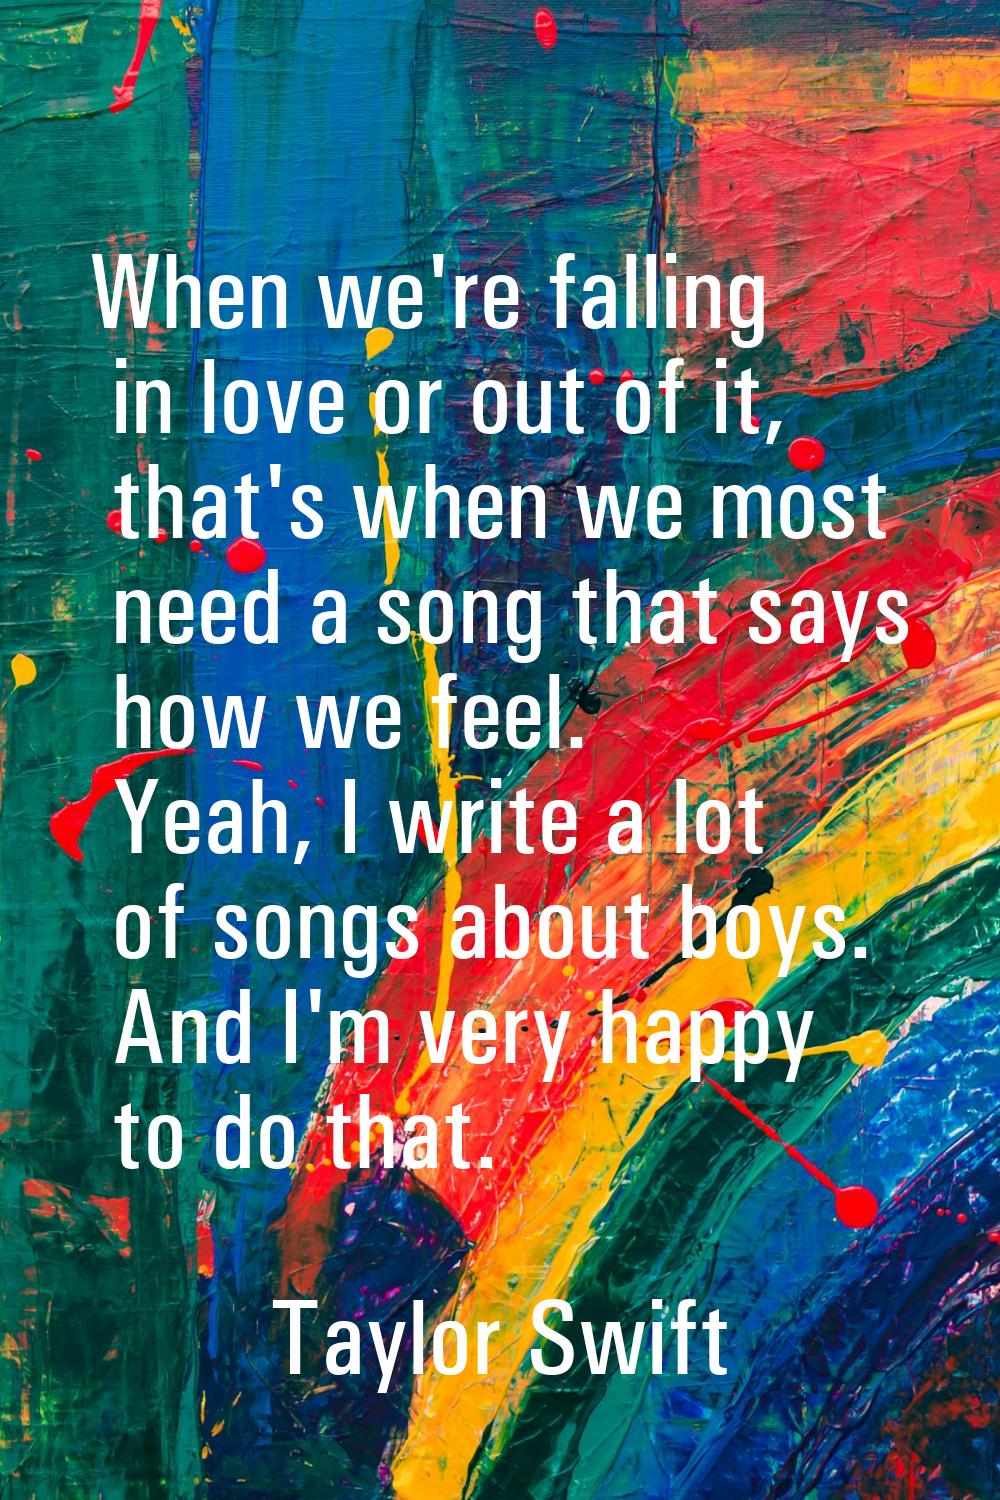 When we're falling in love or out of it, that's when we most need a song that says how we feel. Yea